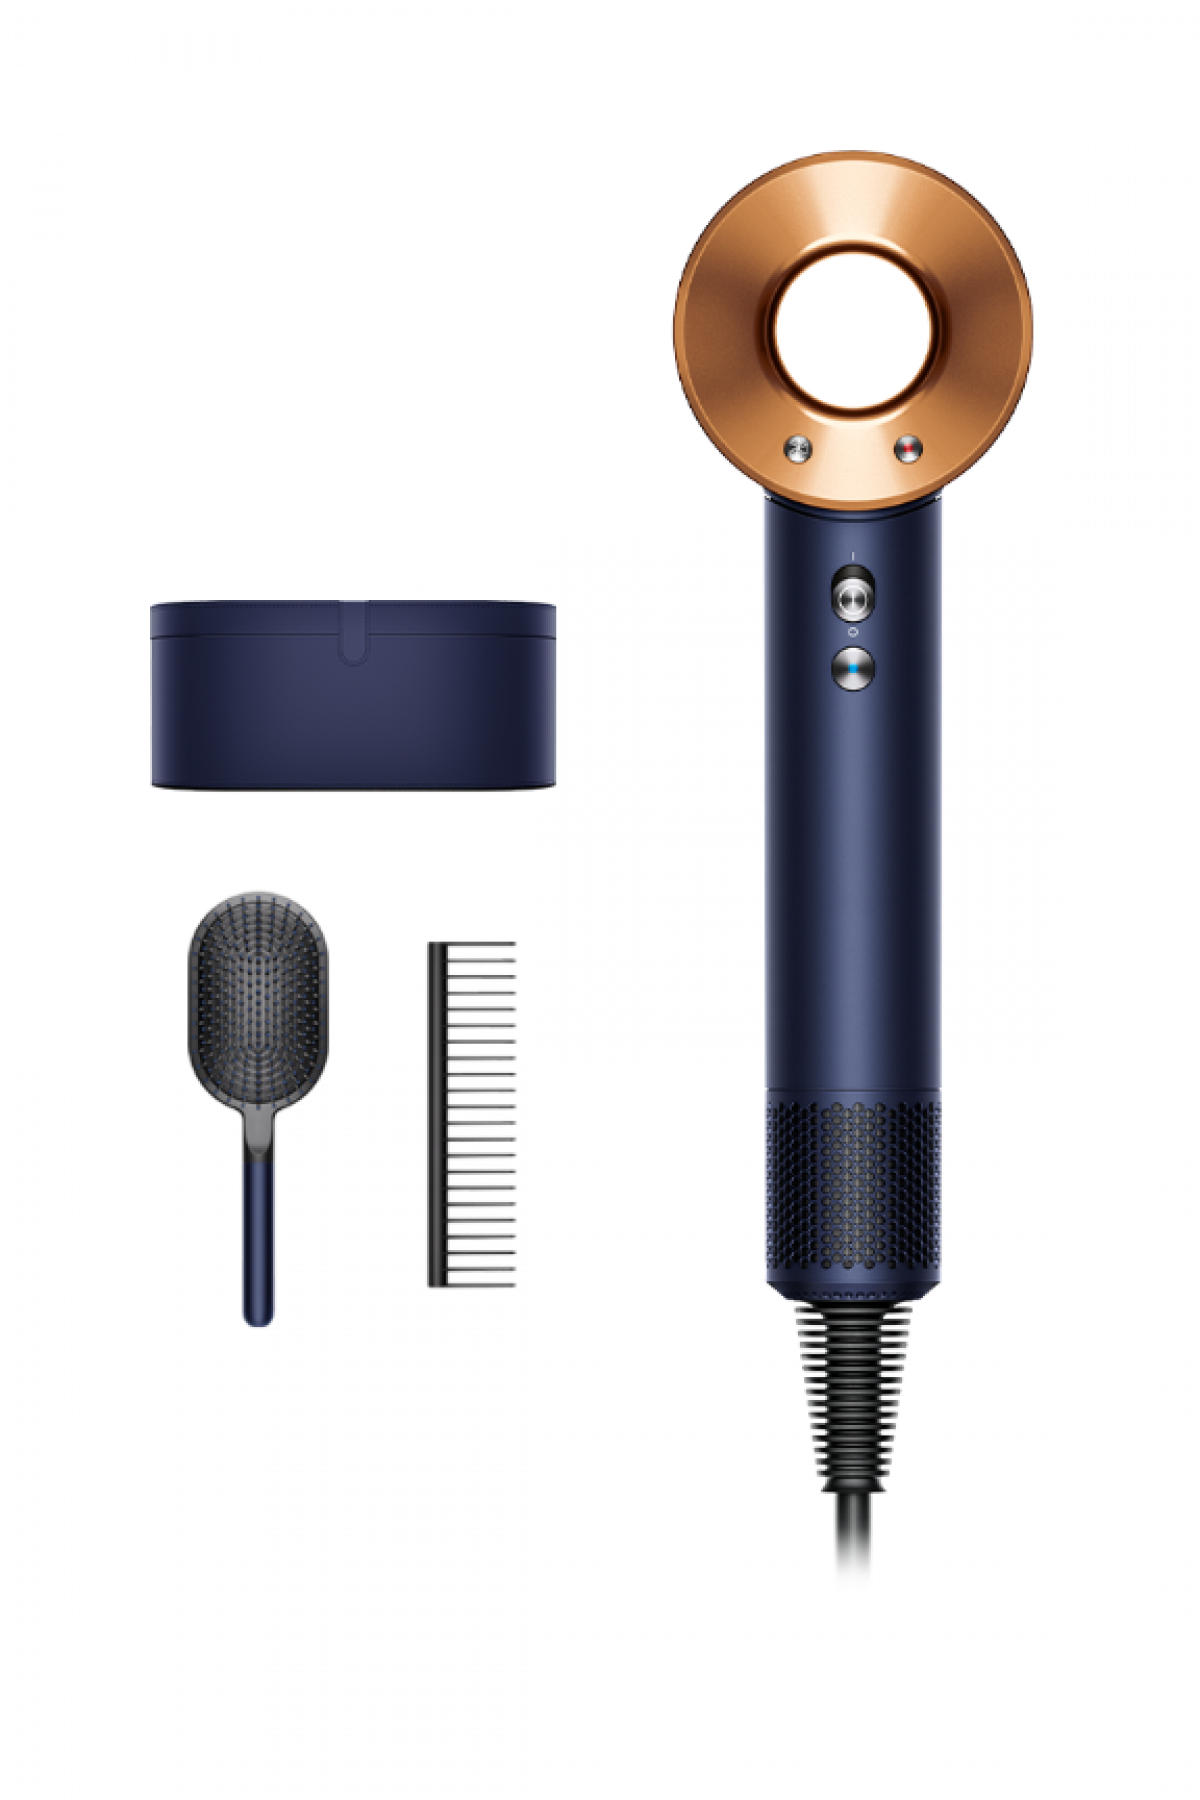 The Dyson supersonic hair dryer.